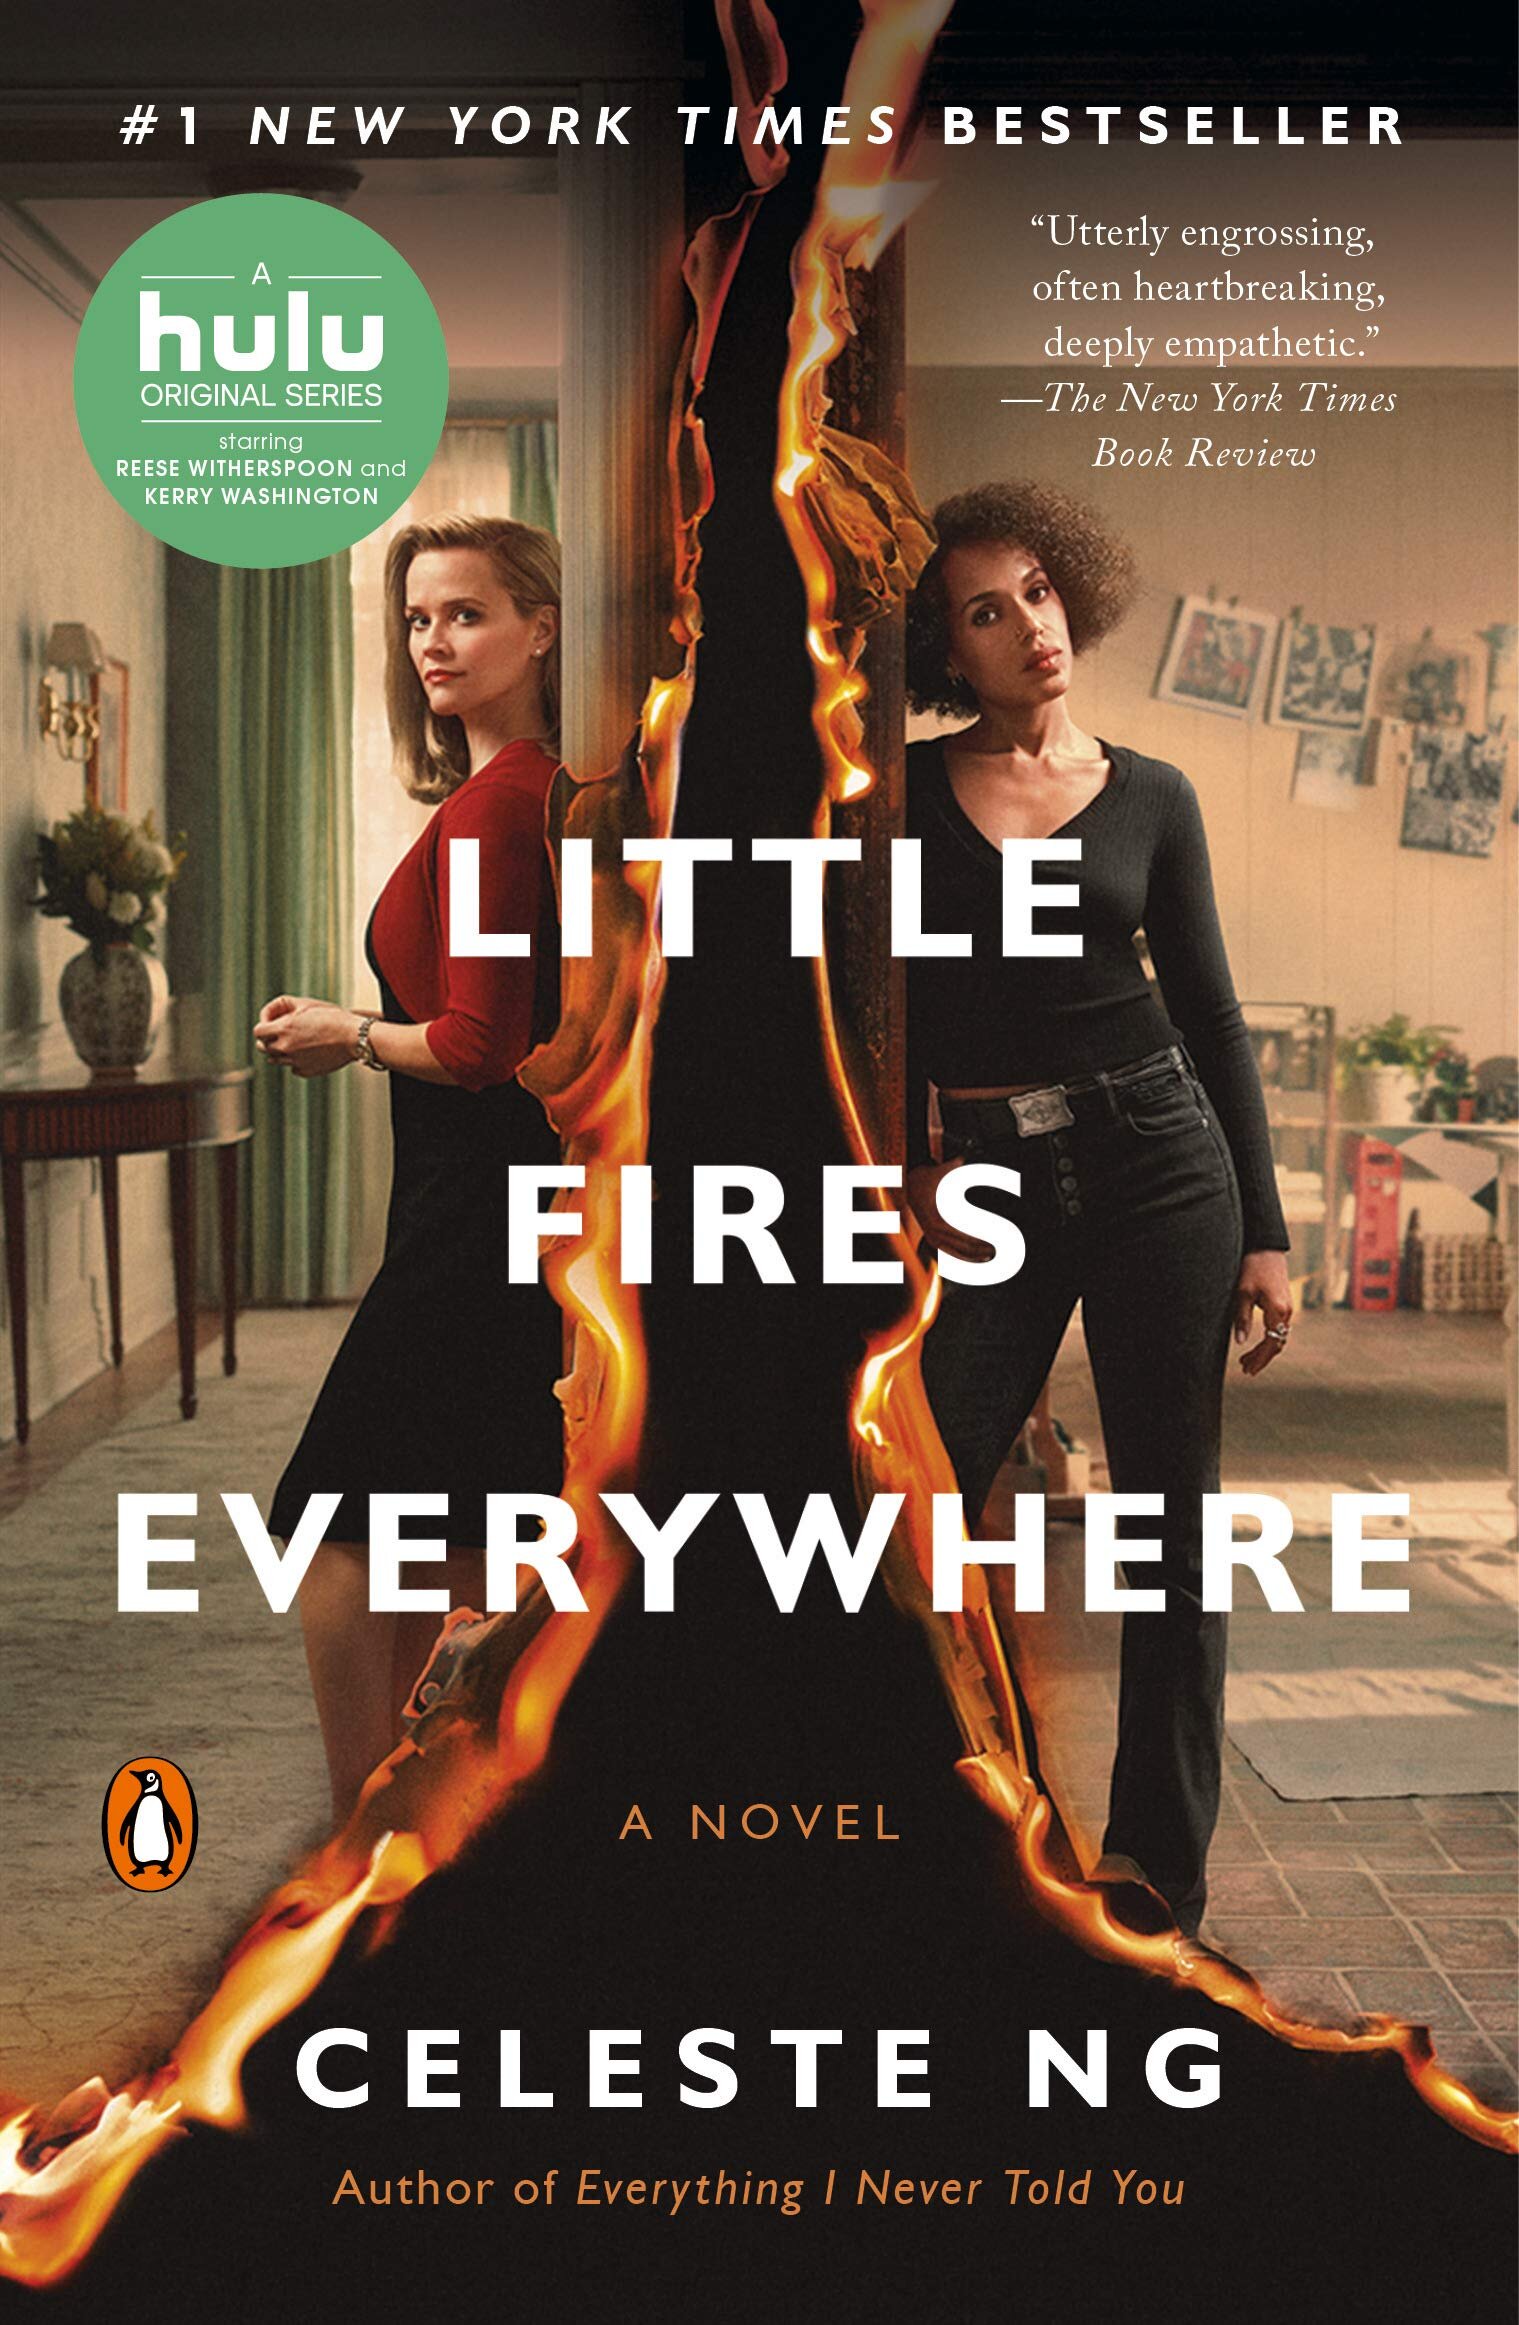 The series tie in book cover featuring Reese on the cover with Kerry Washington which flames decorating the page.